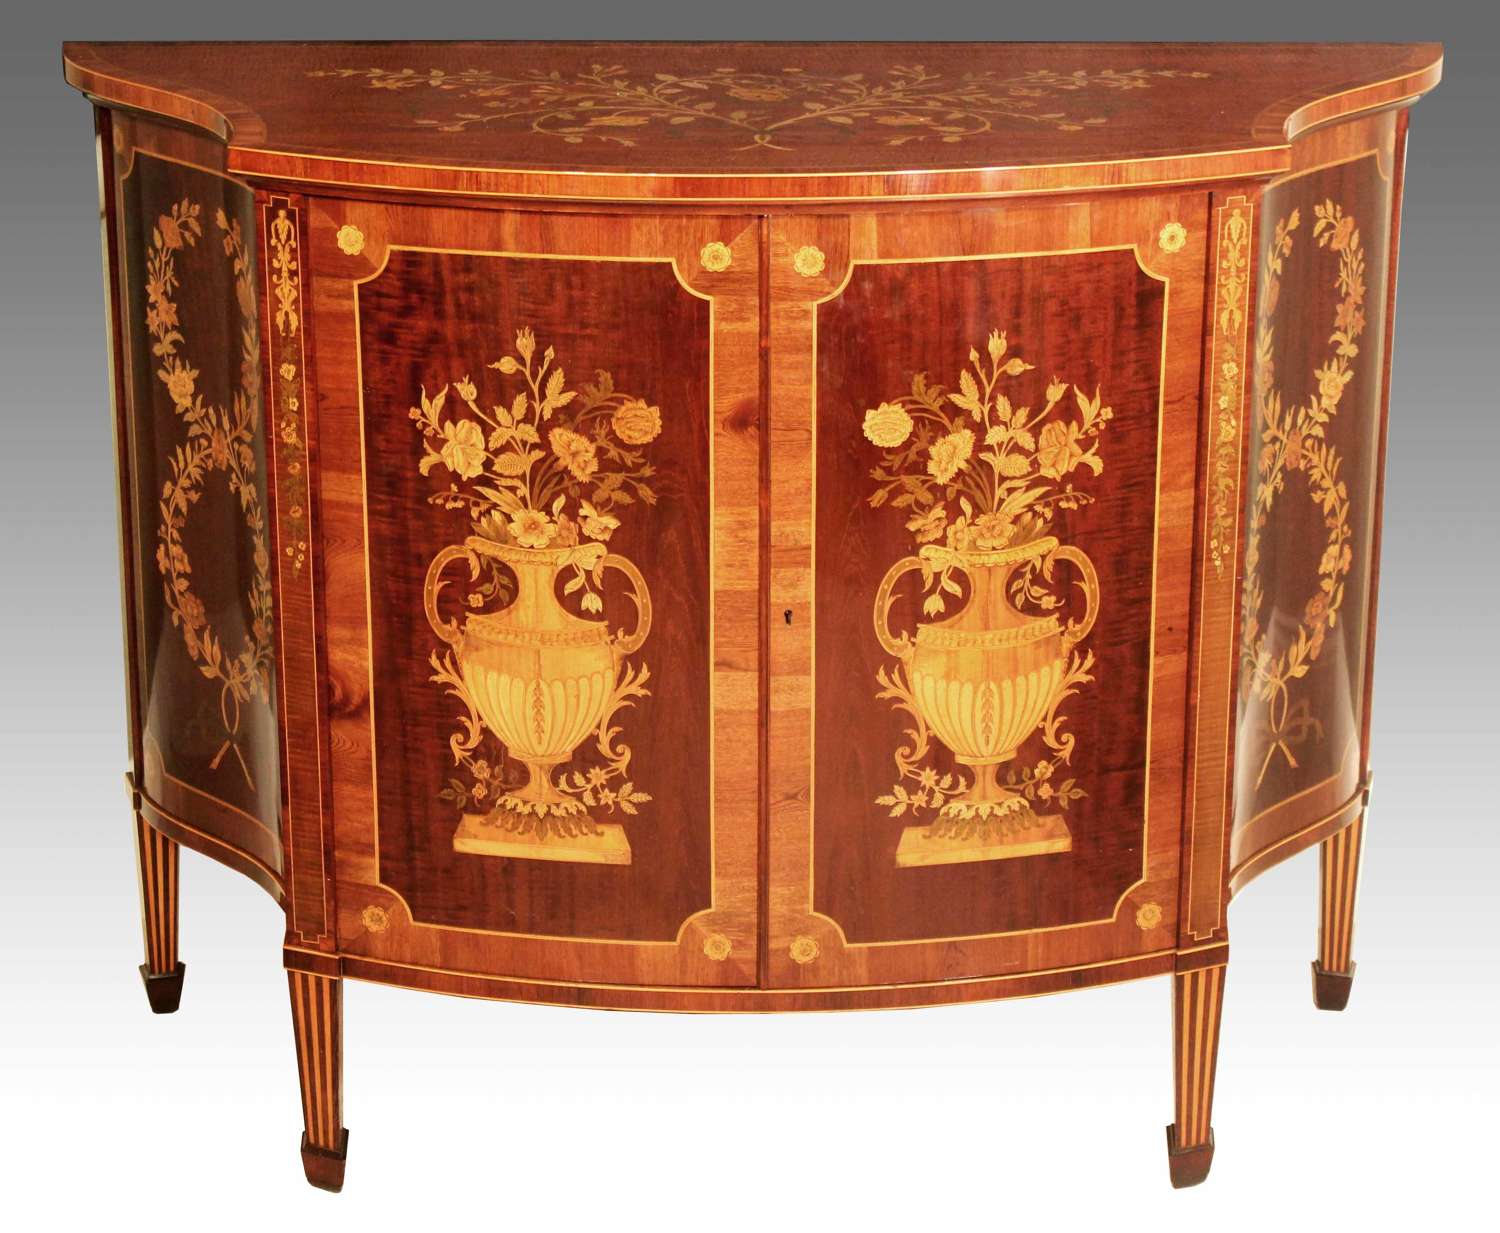 A Superb Late Victorian Mahogany Inlaid Serpentine Commode